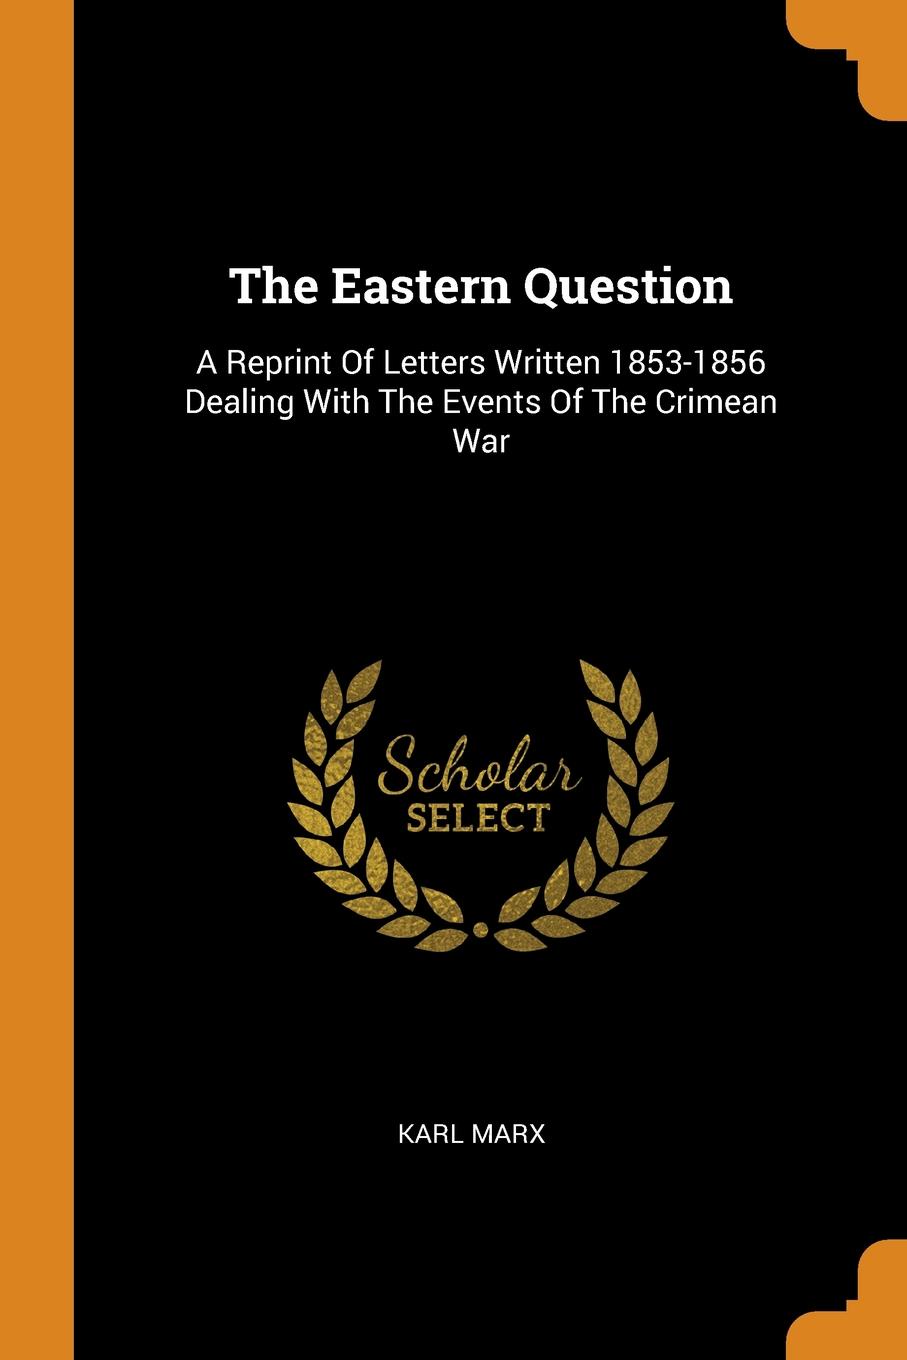 The Eastern Question. A Reprint Of Letters Written 1853-1856 Dealing With The Events Of The Crimean War